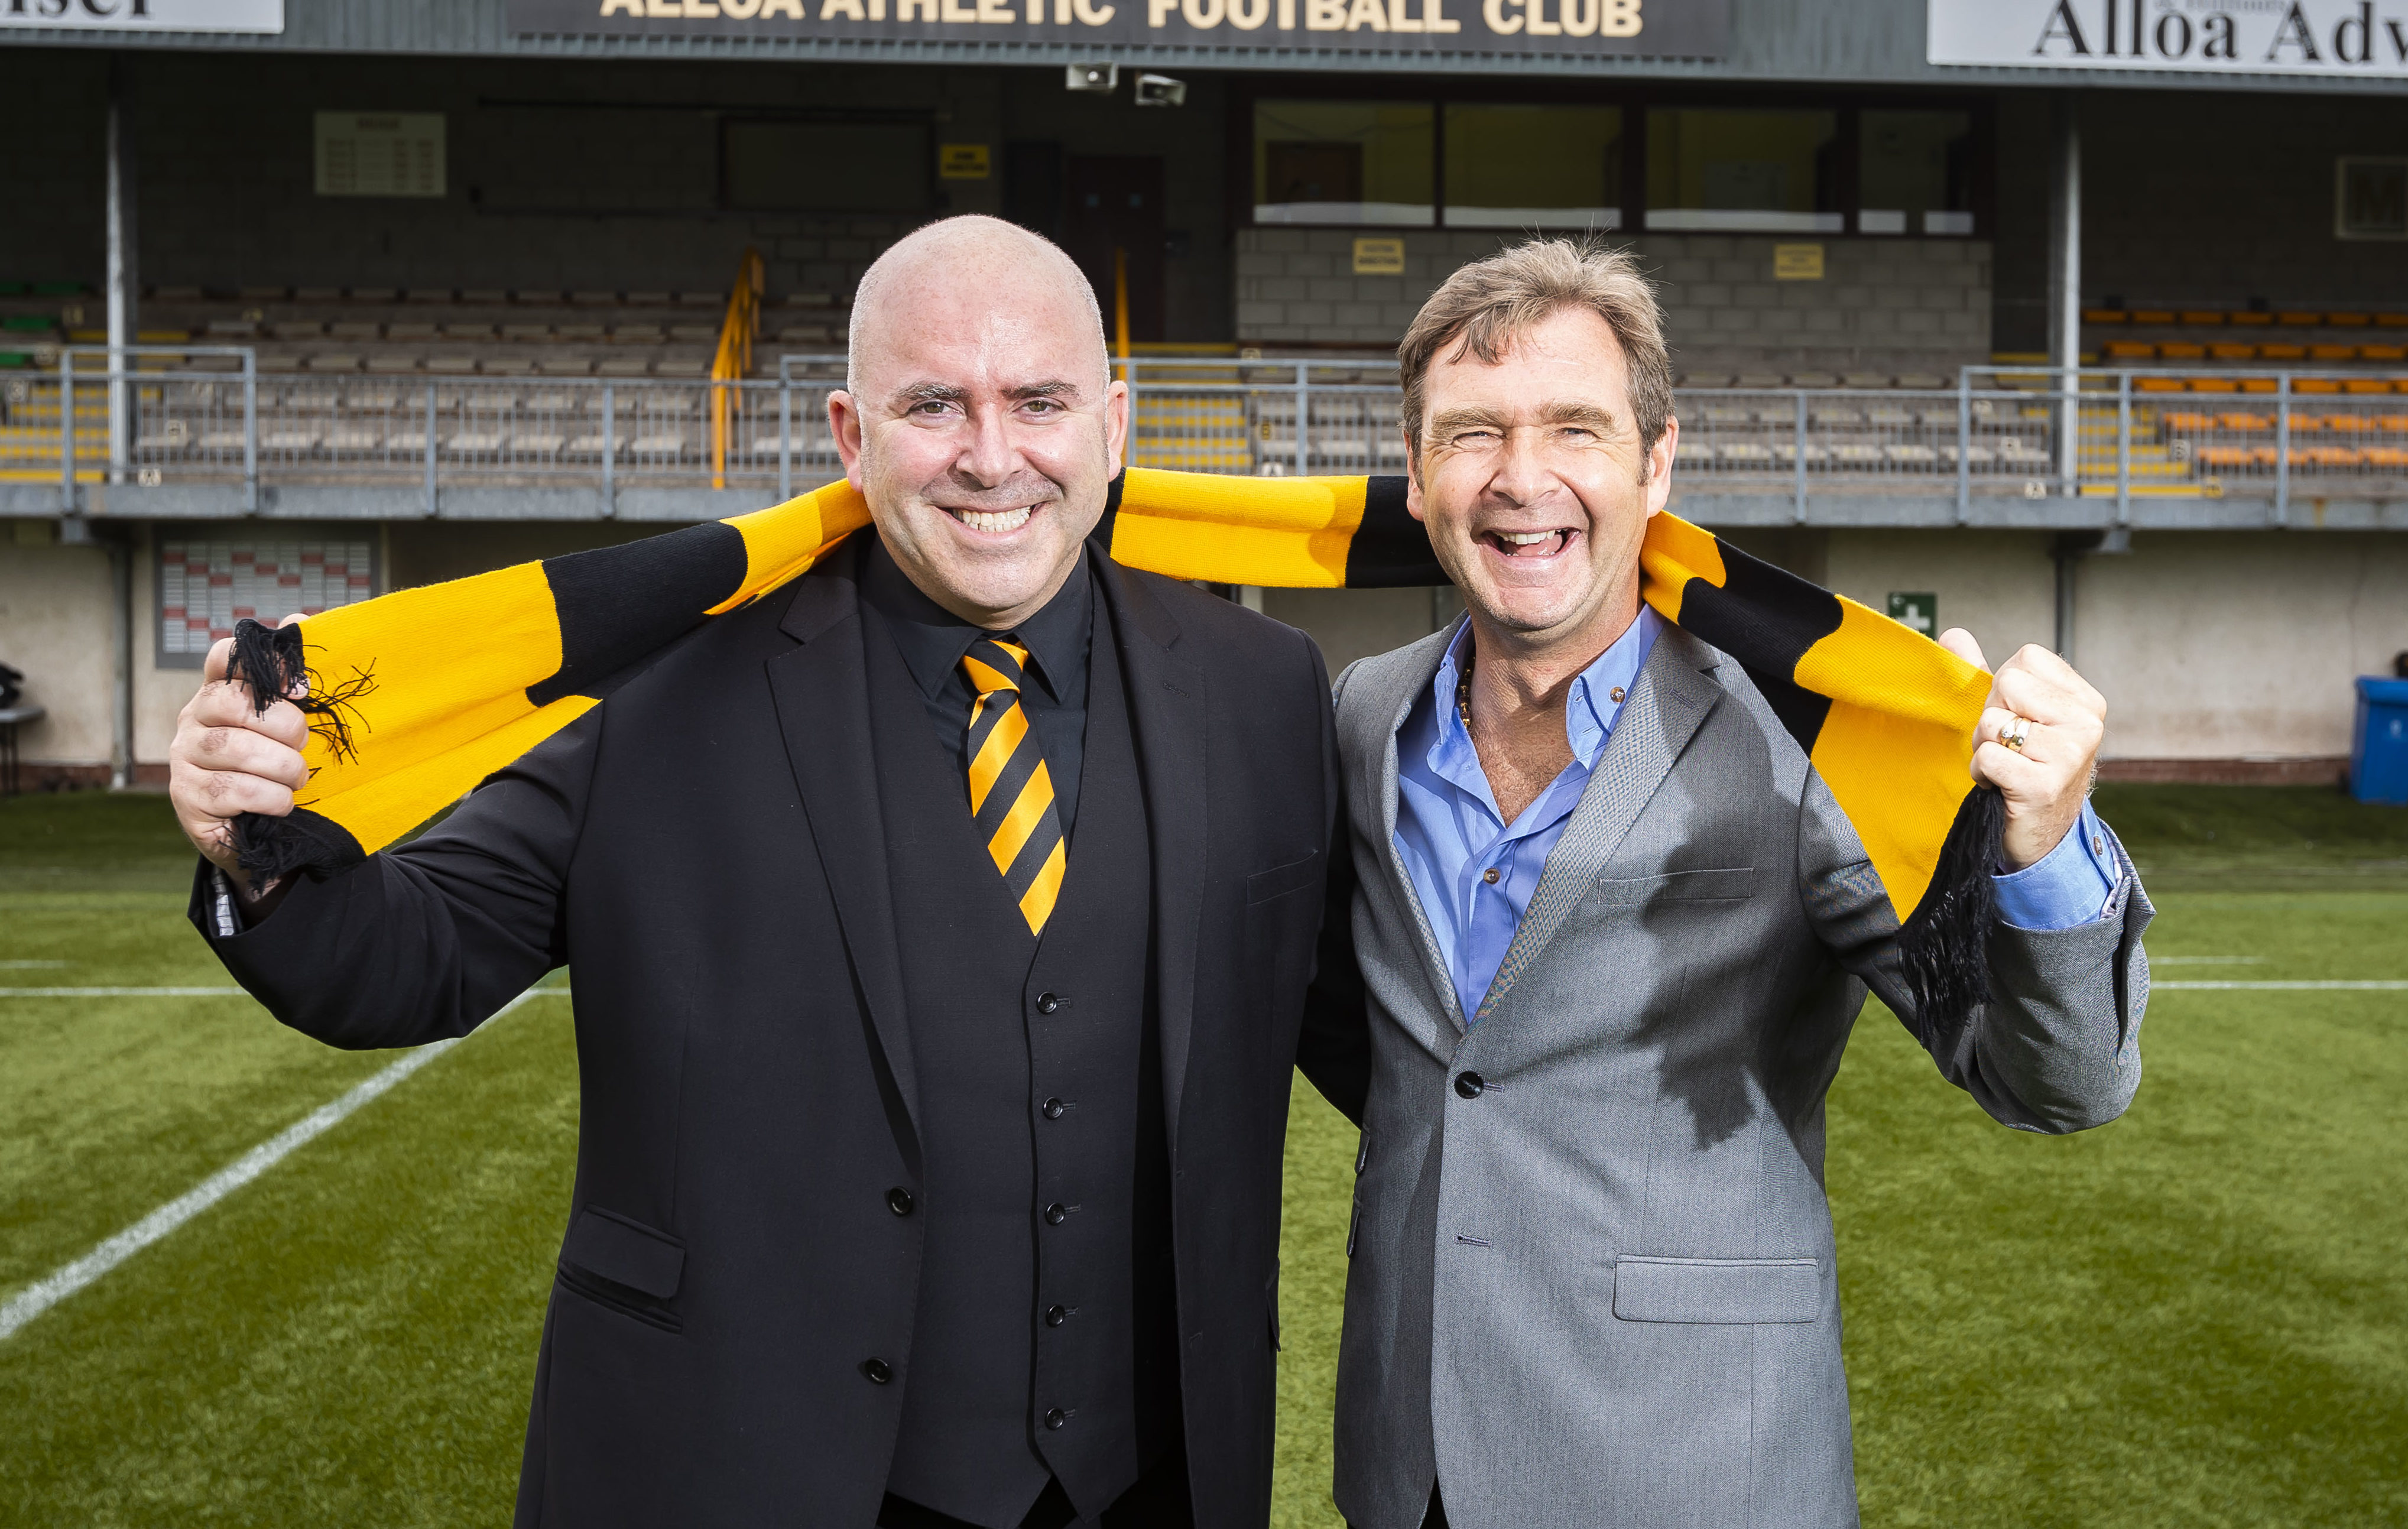 Mike Mulraney was delighted to be able to tempt Peter Grant to take up the reins at Alloa